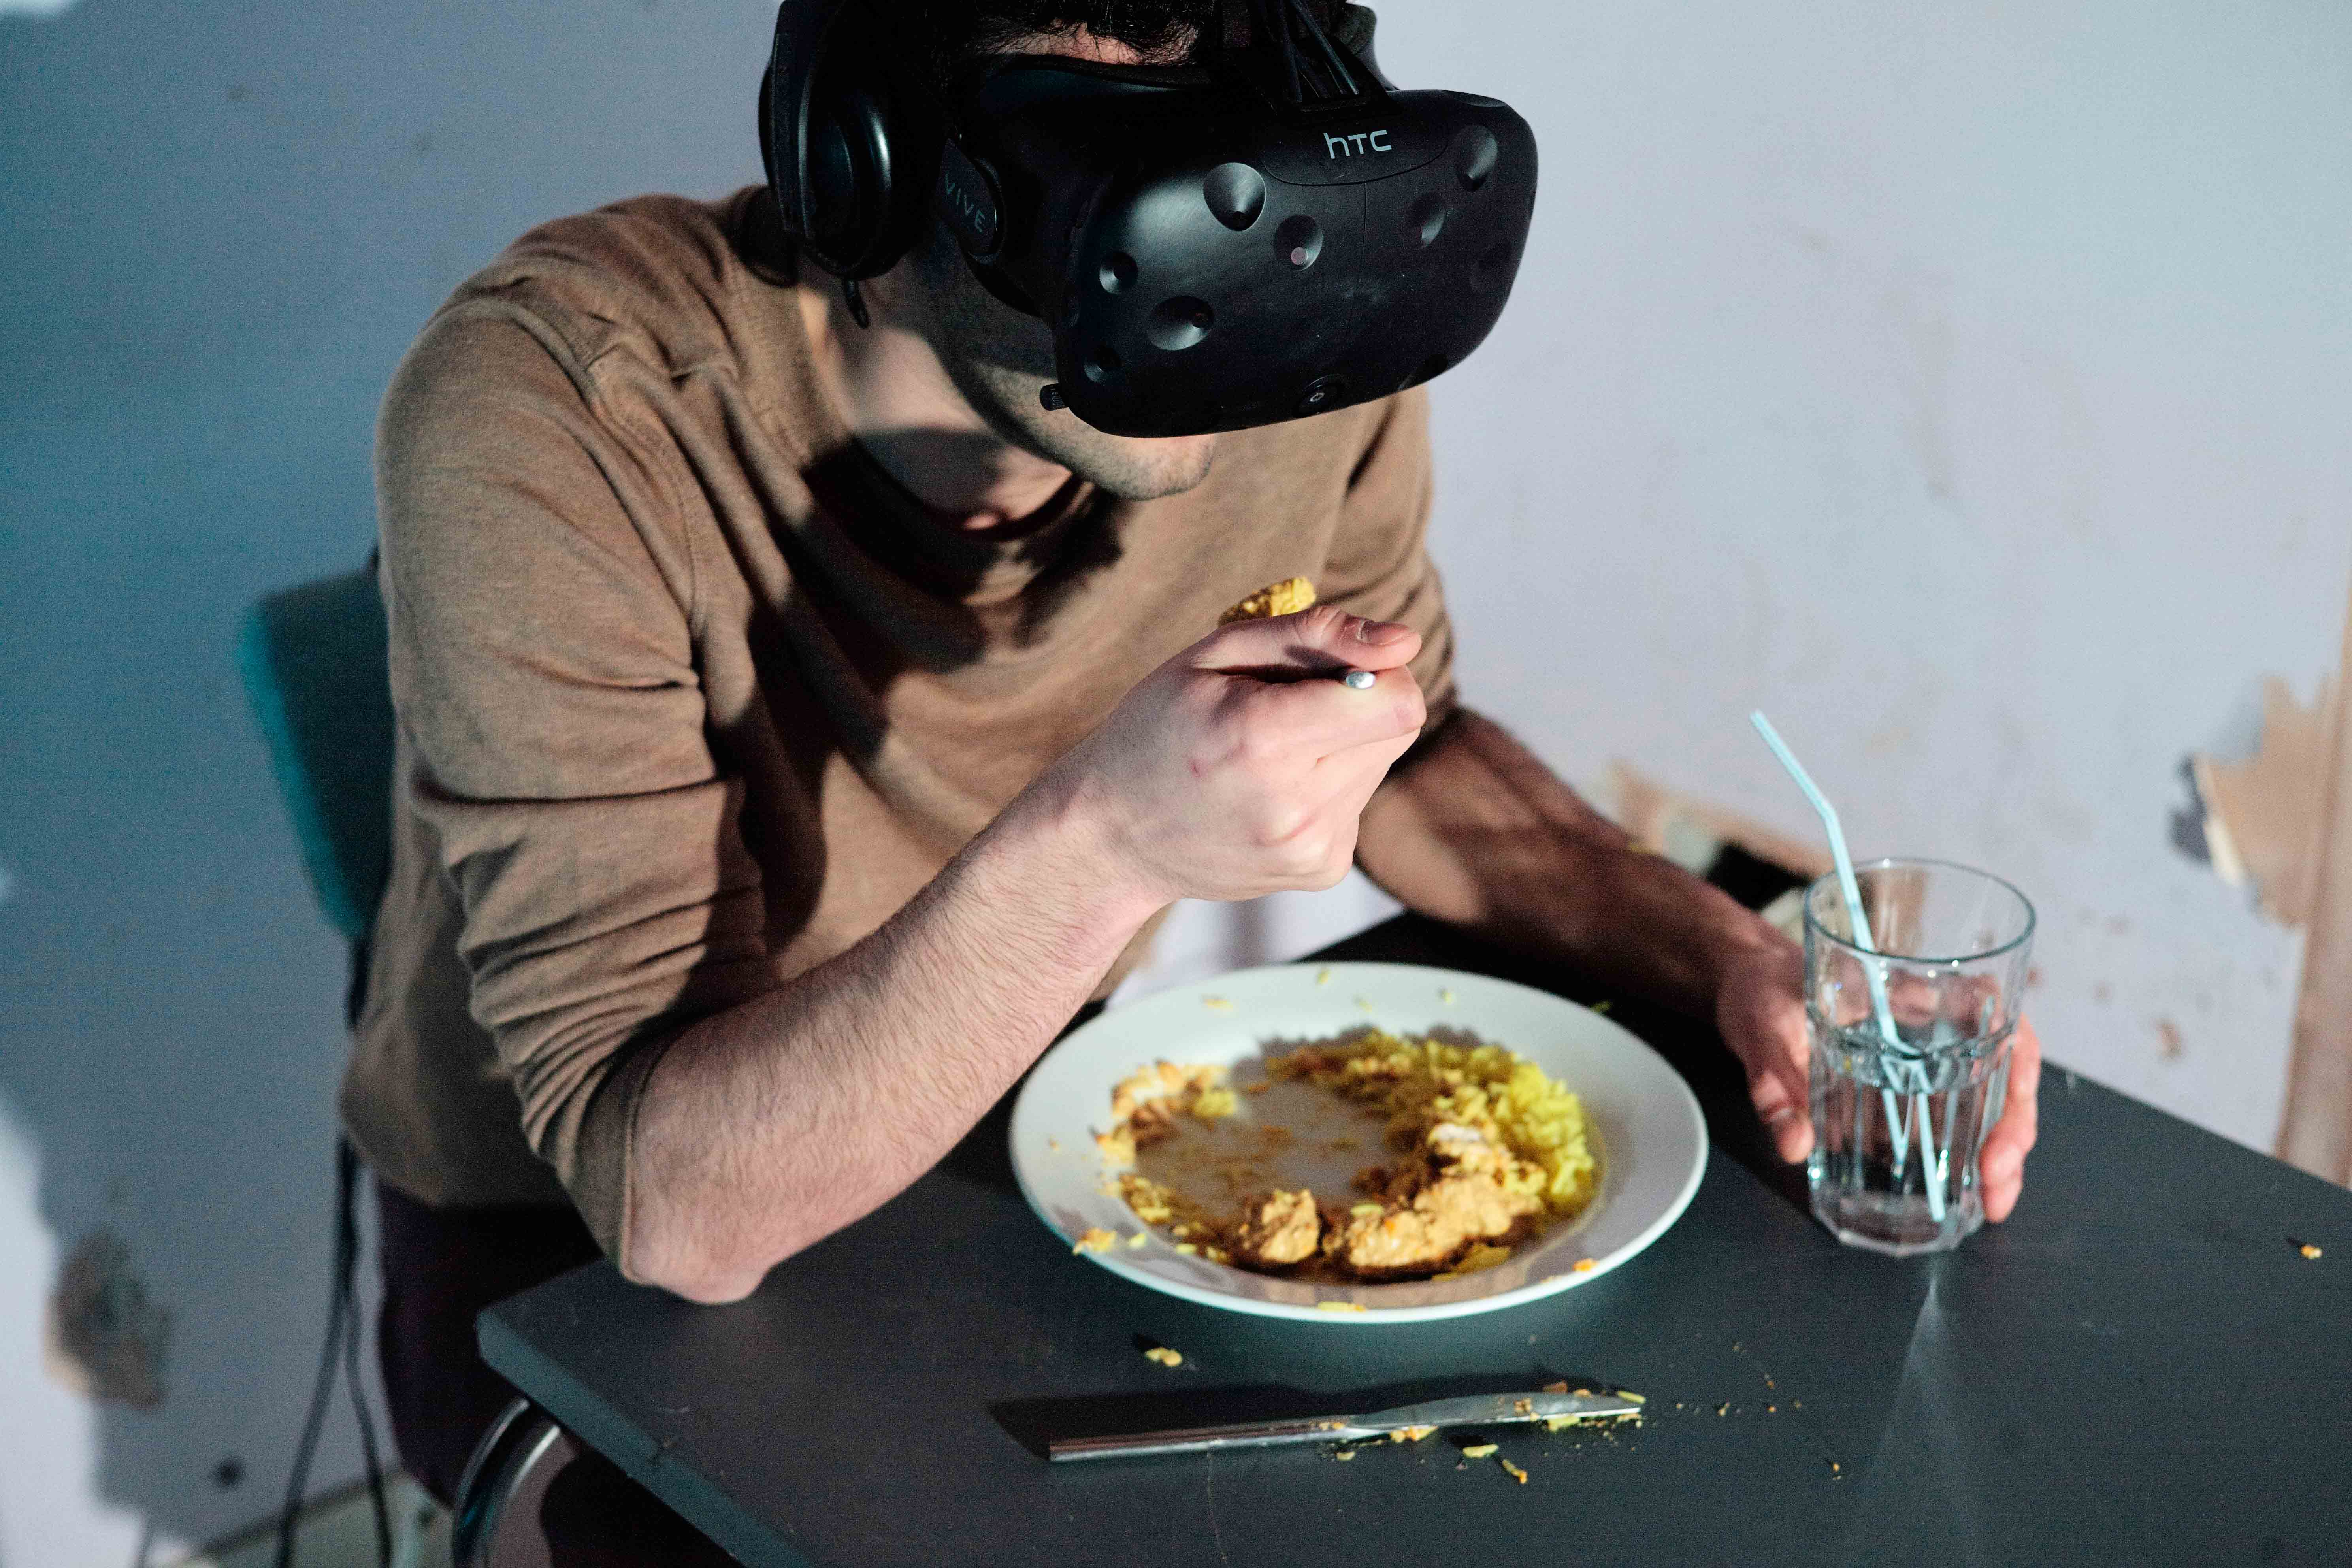 The artist wearing the VR headset eating a curry at the table.